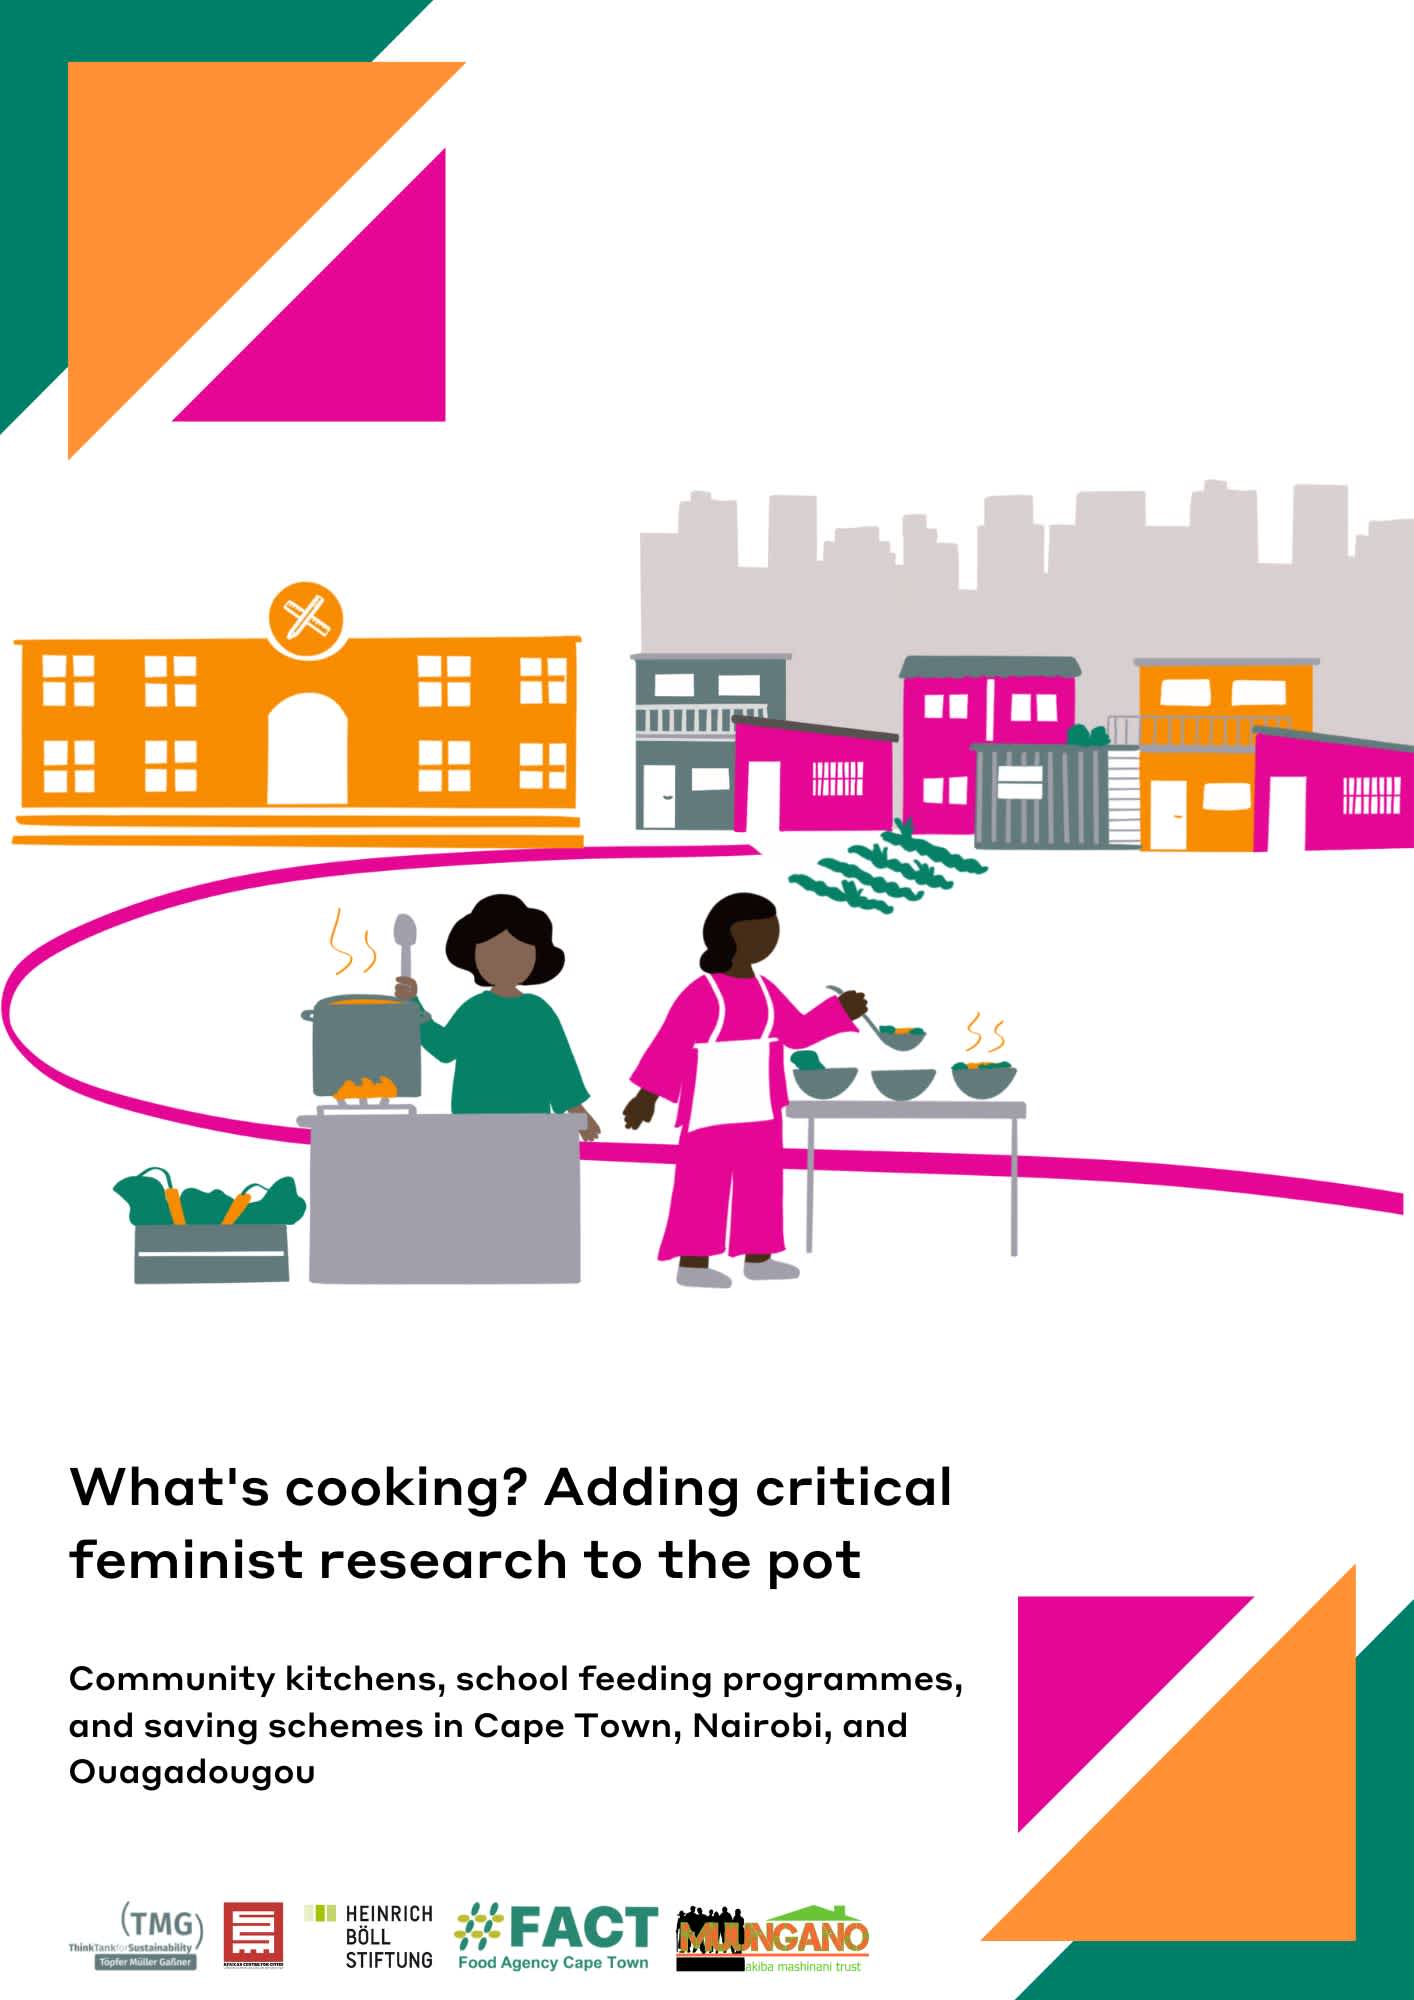 What's cooking? Adding critical feminist research to the pot